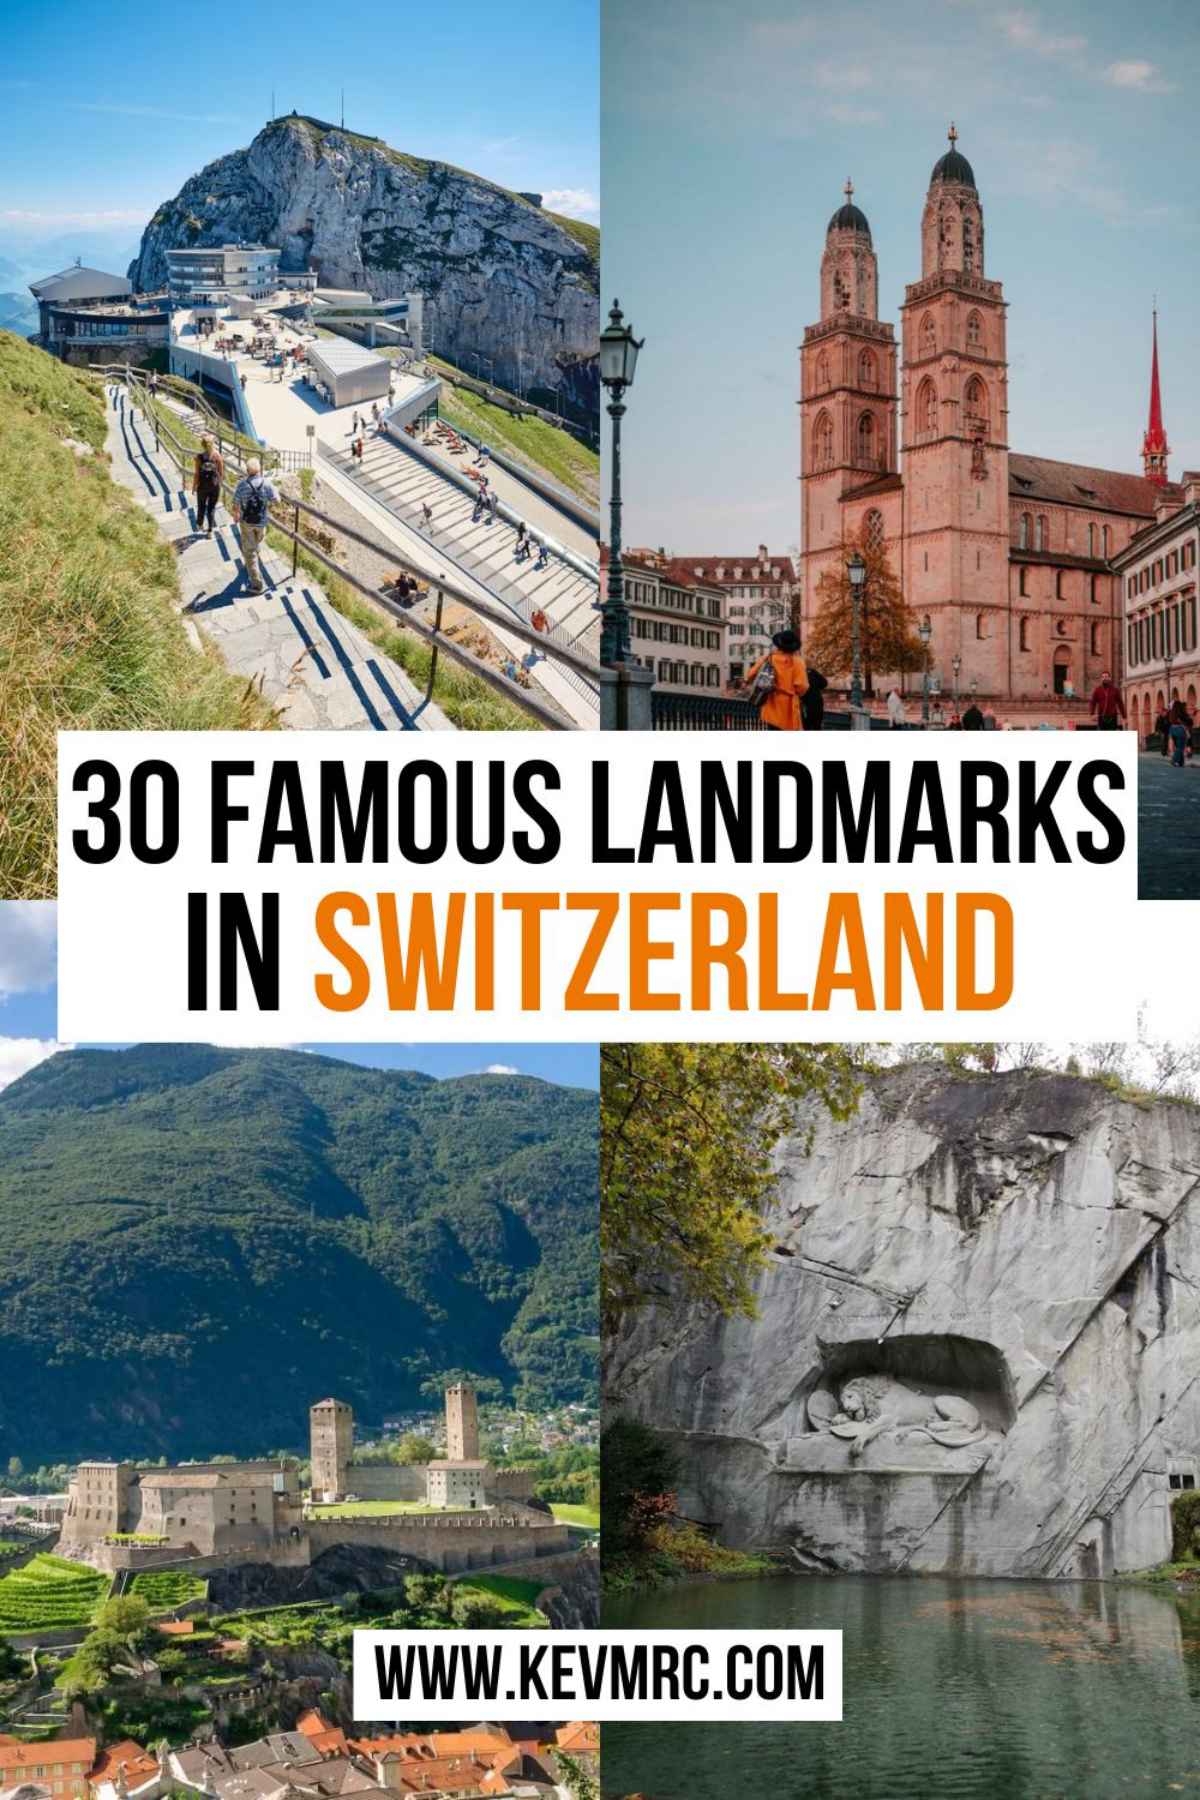 Discover in this post the 30 famous landmarks in Switzerland, with photos, information and free map to easily visit them. switzerland landmarks | best places in switzerland | famous places in switzerland | switzerland travel #switzerland